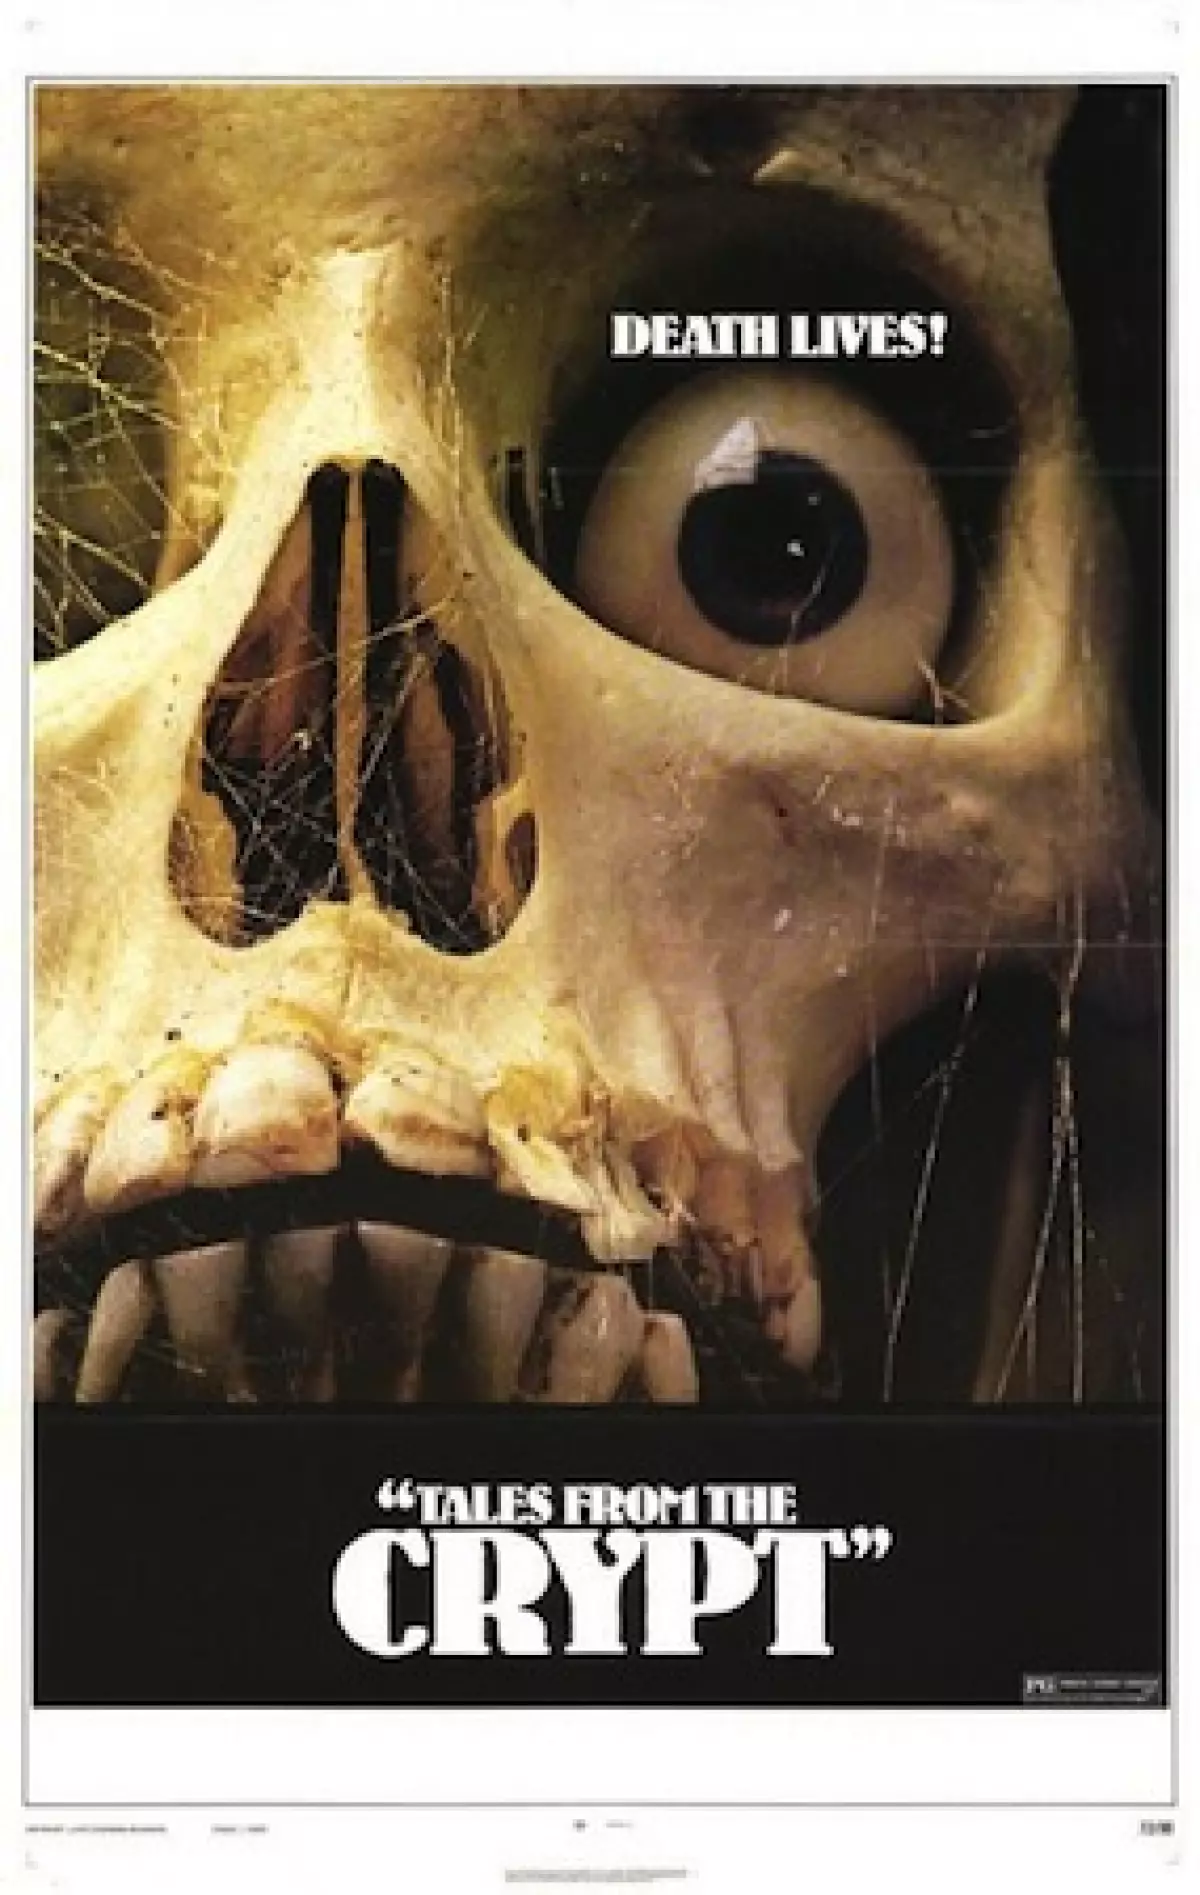 Tales from the crypt film poster